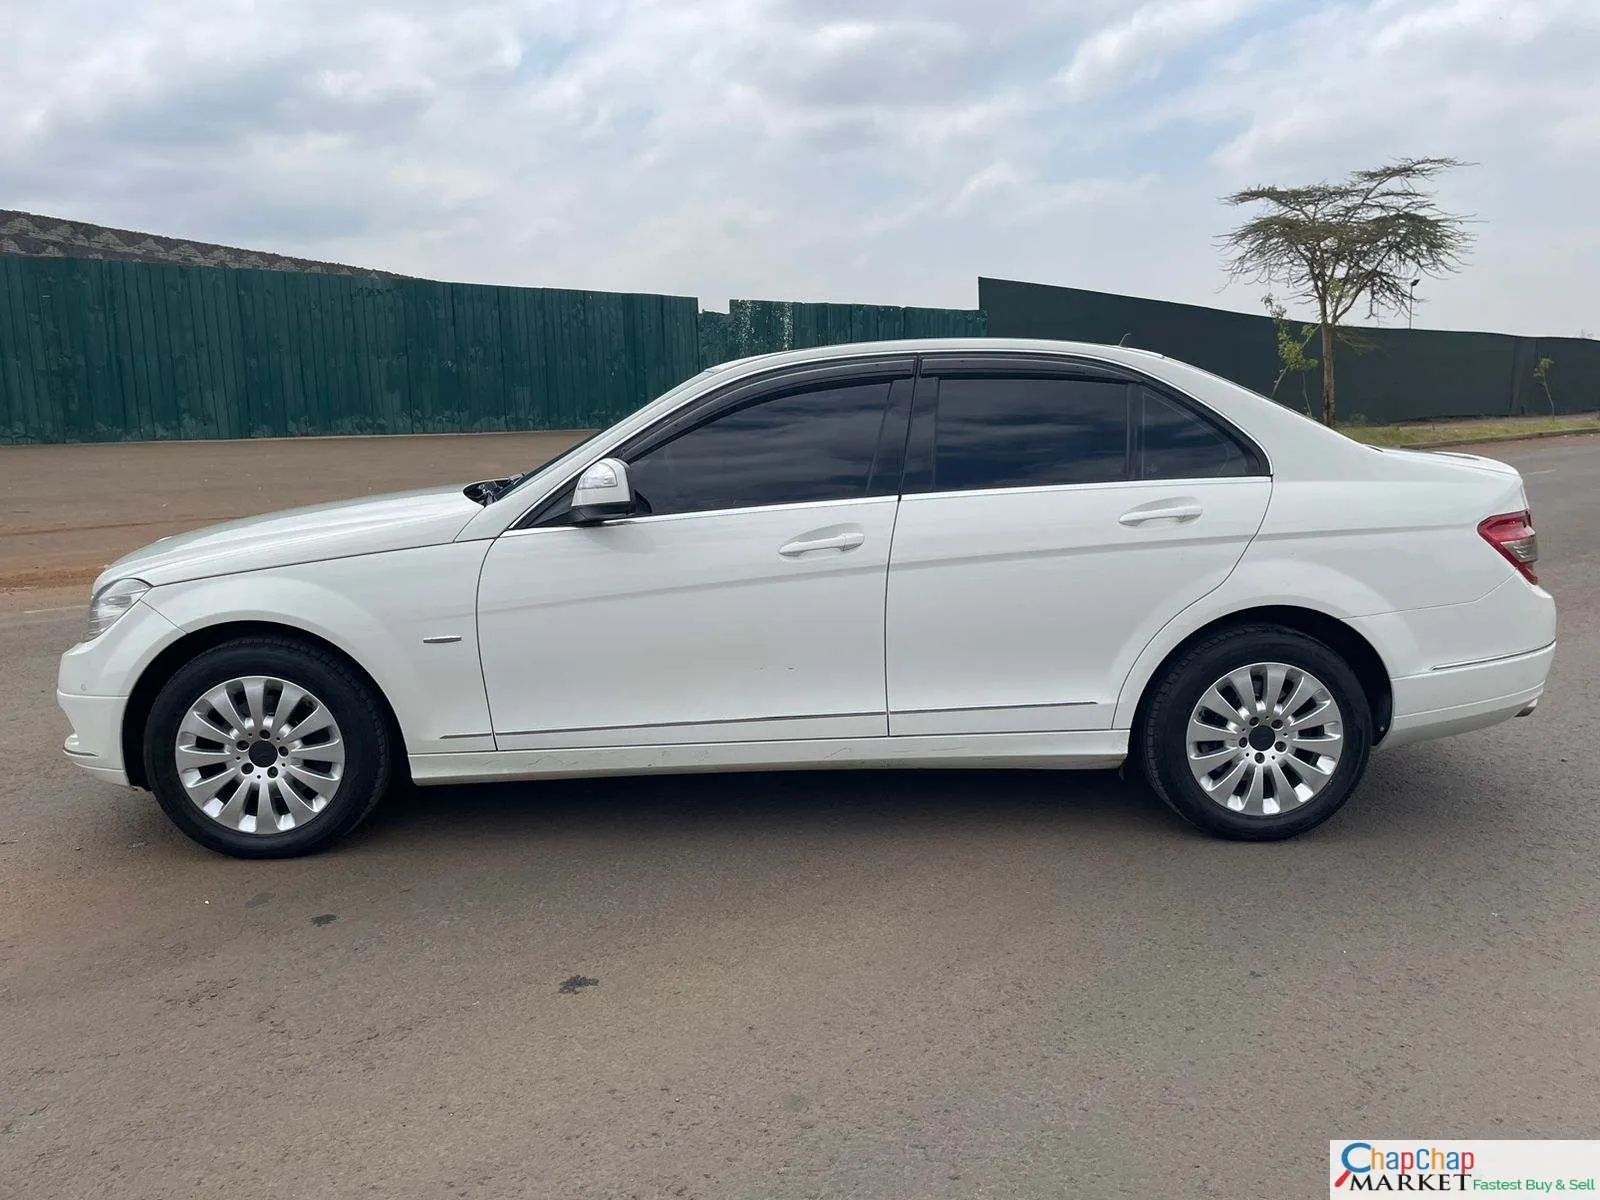 Mercedes Benz C200 for sale in Kenya 🔥 You Pay 30% DEPOSIT Trade in OK EXCLUSIVE Hire Purchase Installments bank finance ok (SOLD)